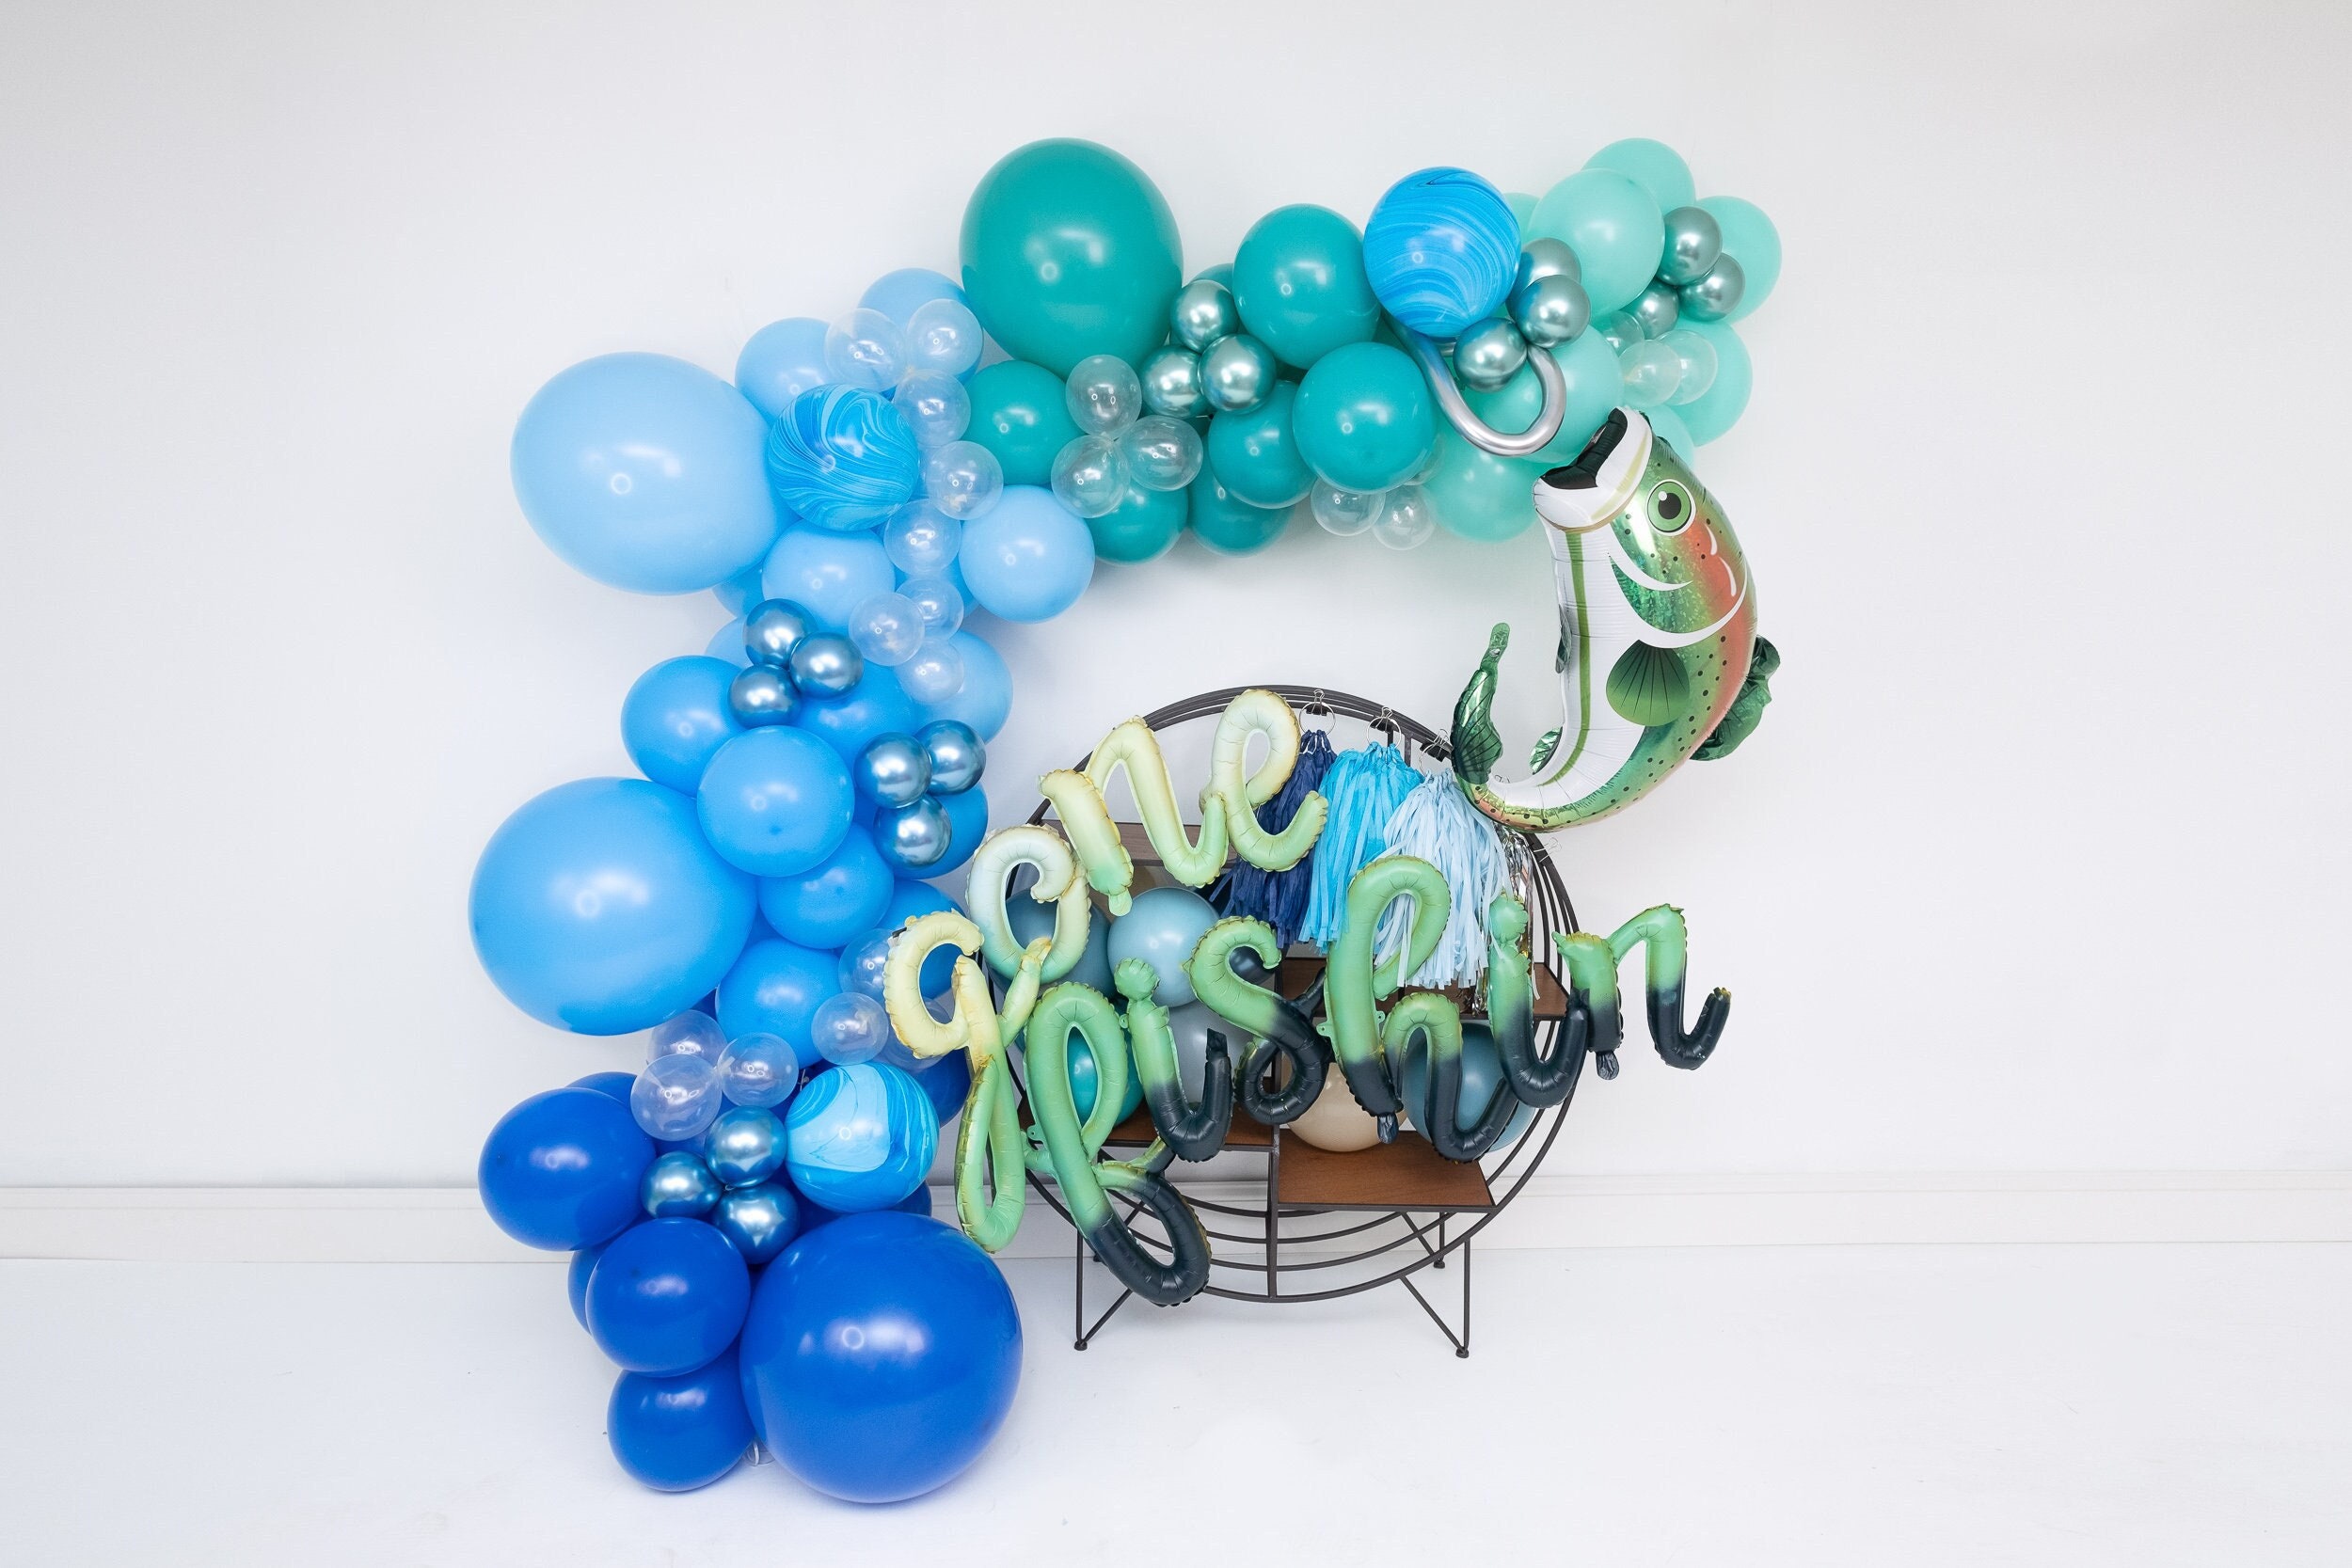 balloon arch made with fishing line Easy to do!!